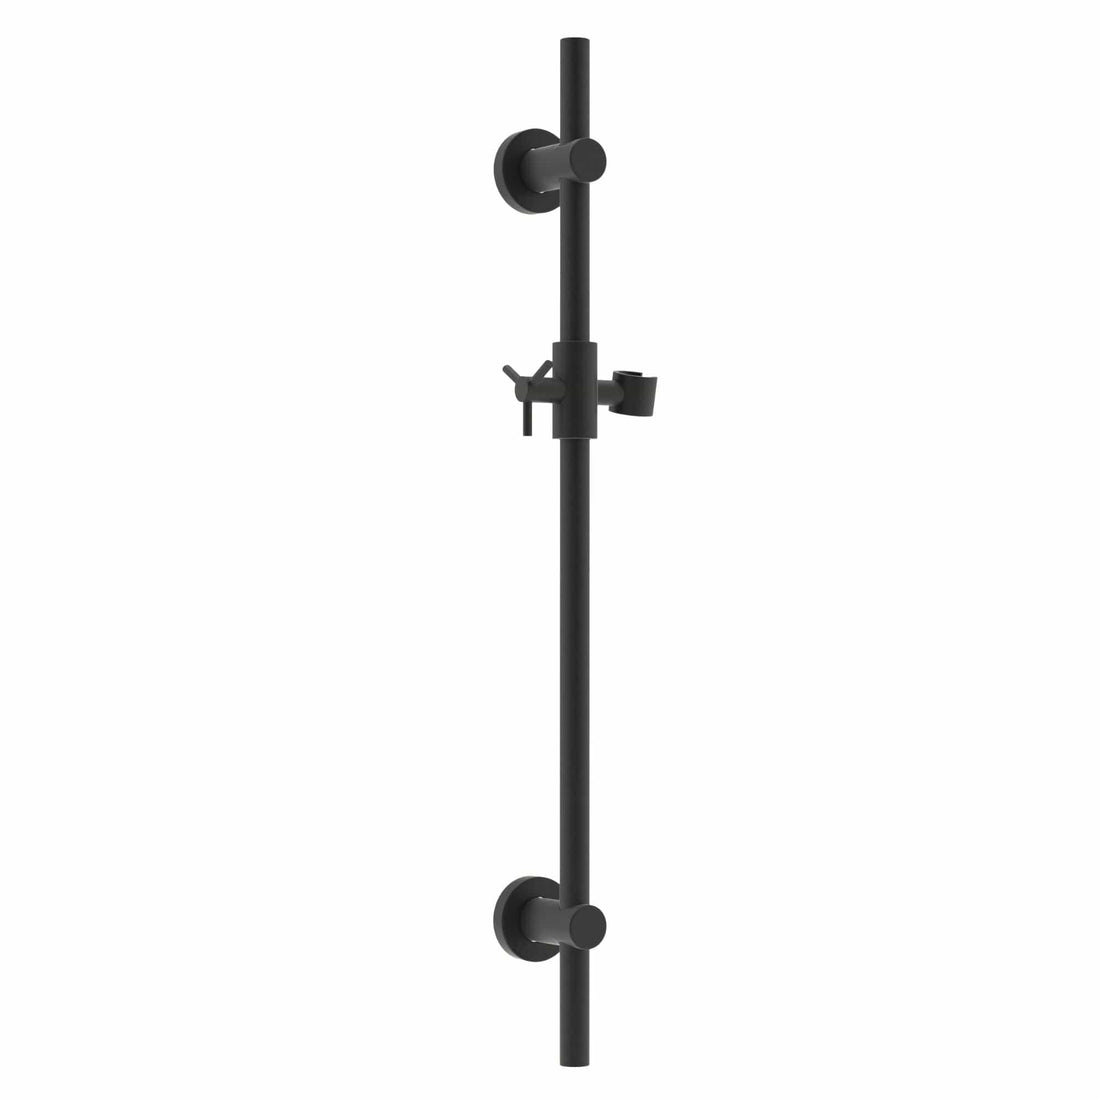 (Main Image) All Metal 27.5 Inch Shower Slide Bar for Hand Held Shower Heads, Oil Rubbed Bronze | Adjustable Height Showerhead with Hose Rail System | Easily Adjust Height & Angle of Handshower Holder Bracket Oil Rubbed Bronze - The Shower Head Store